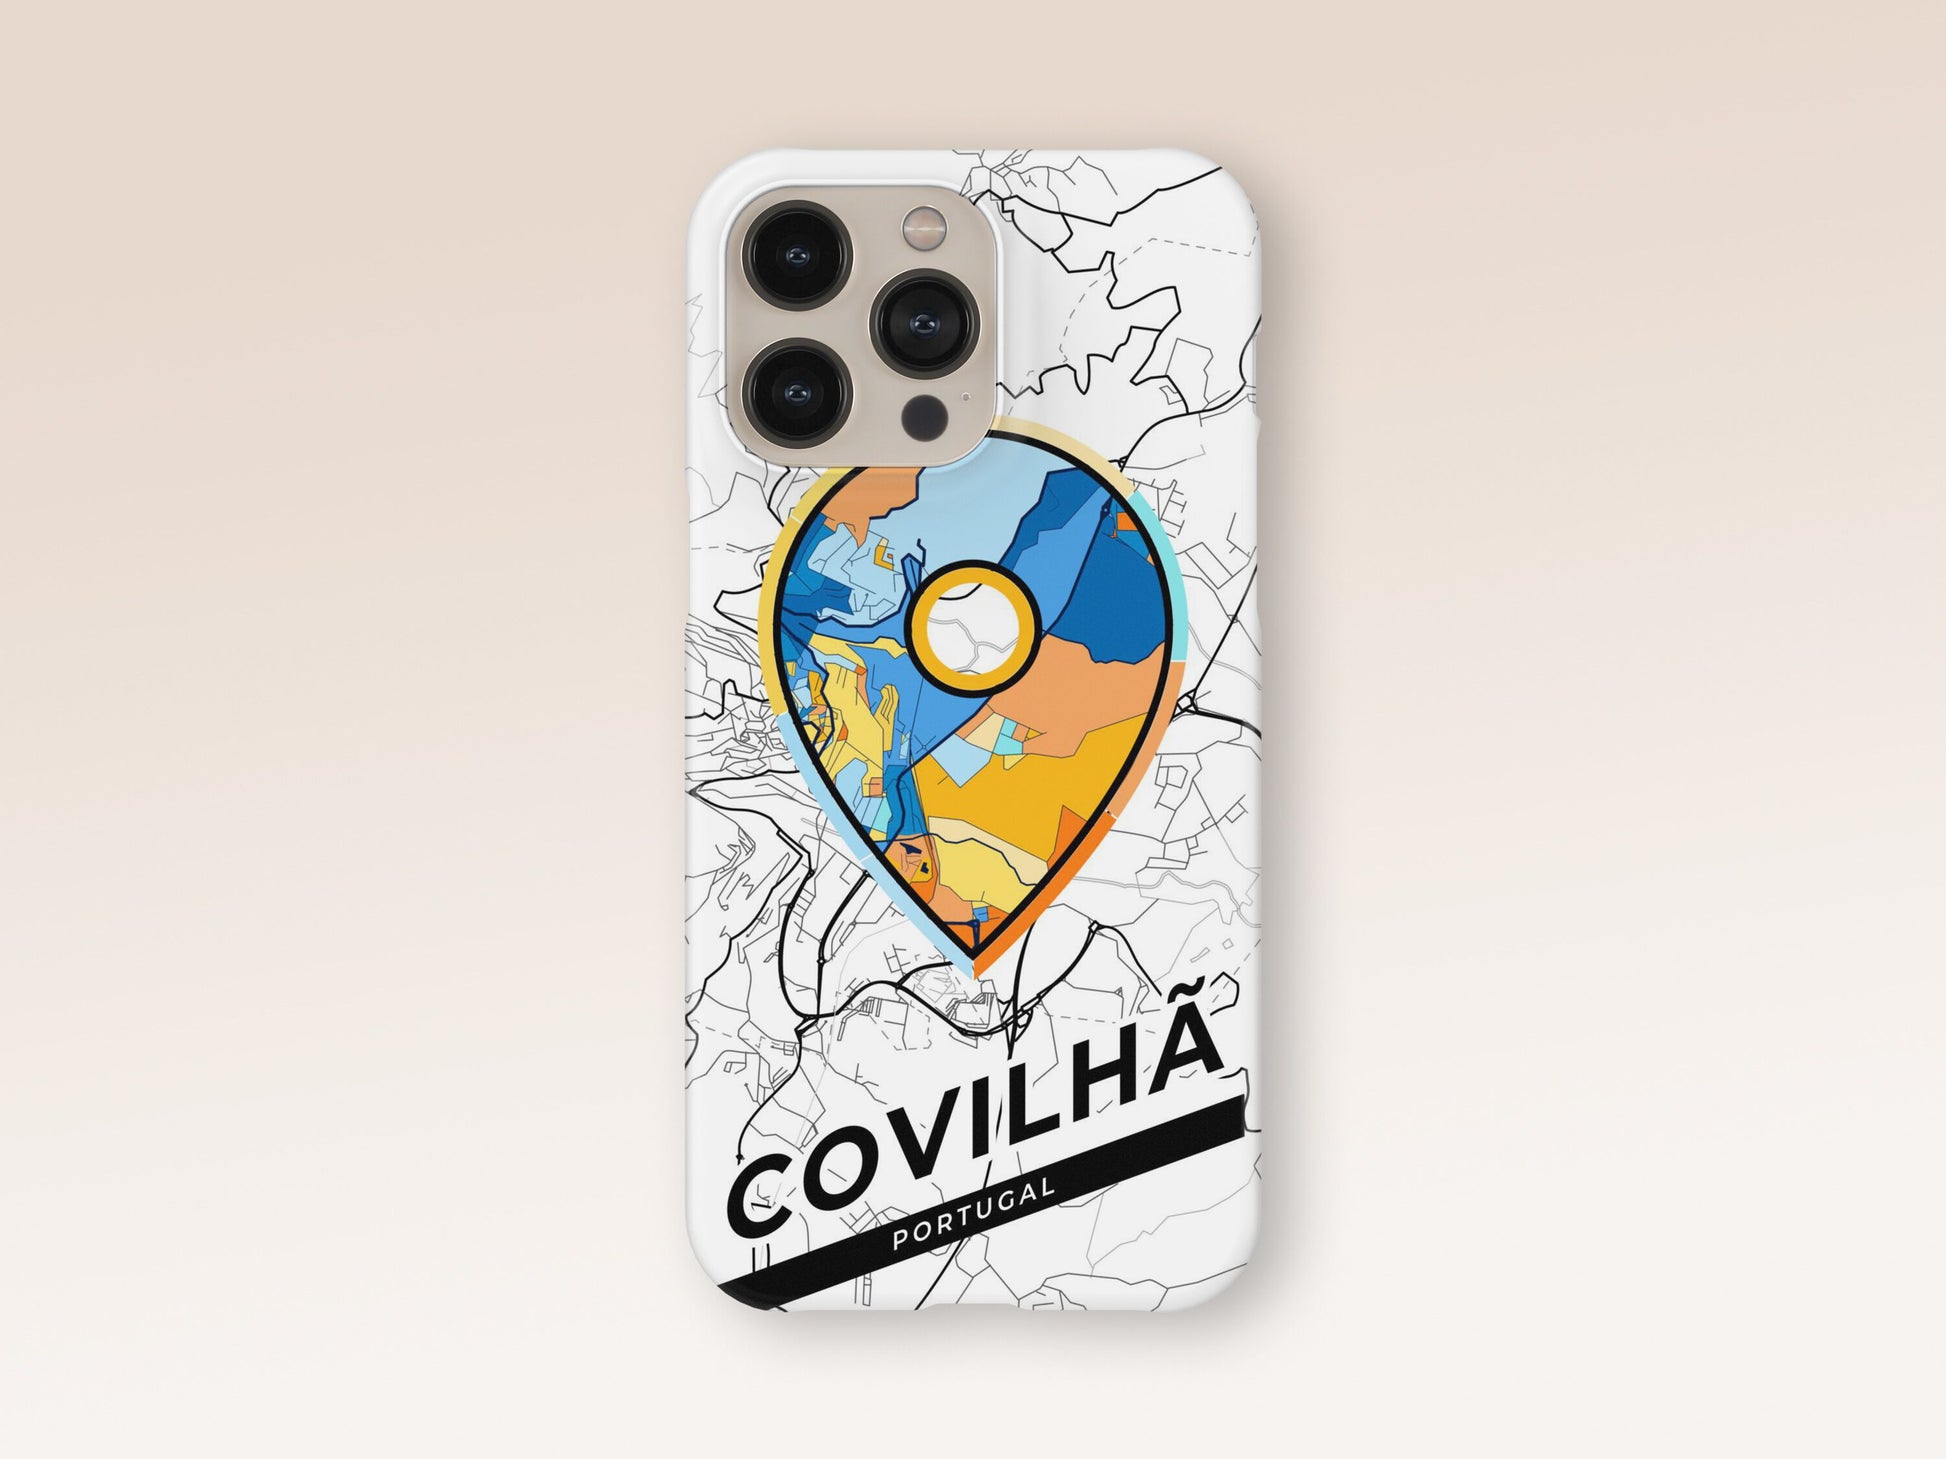 Covilhã Portugal slim phone case with colorful icon. Birthday, wedding or housewarming gift. Couple match cases. 1